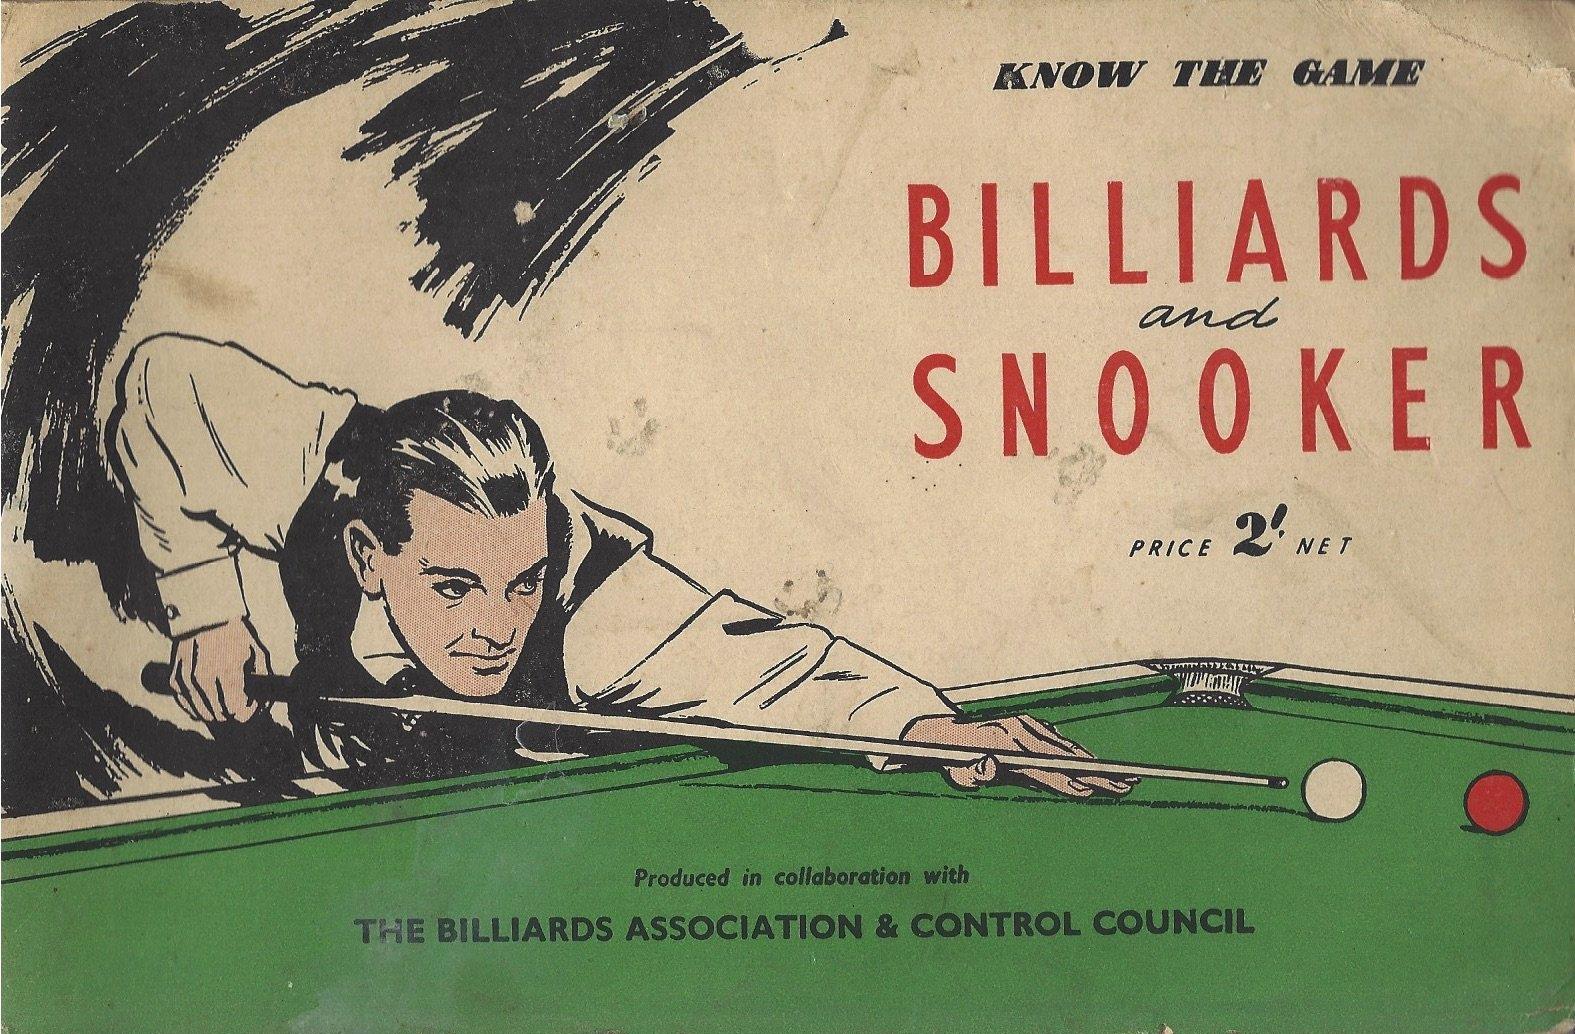 know-the-game-billiards-snooker-1968.jpg